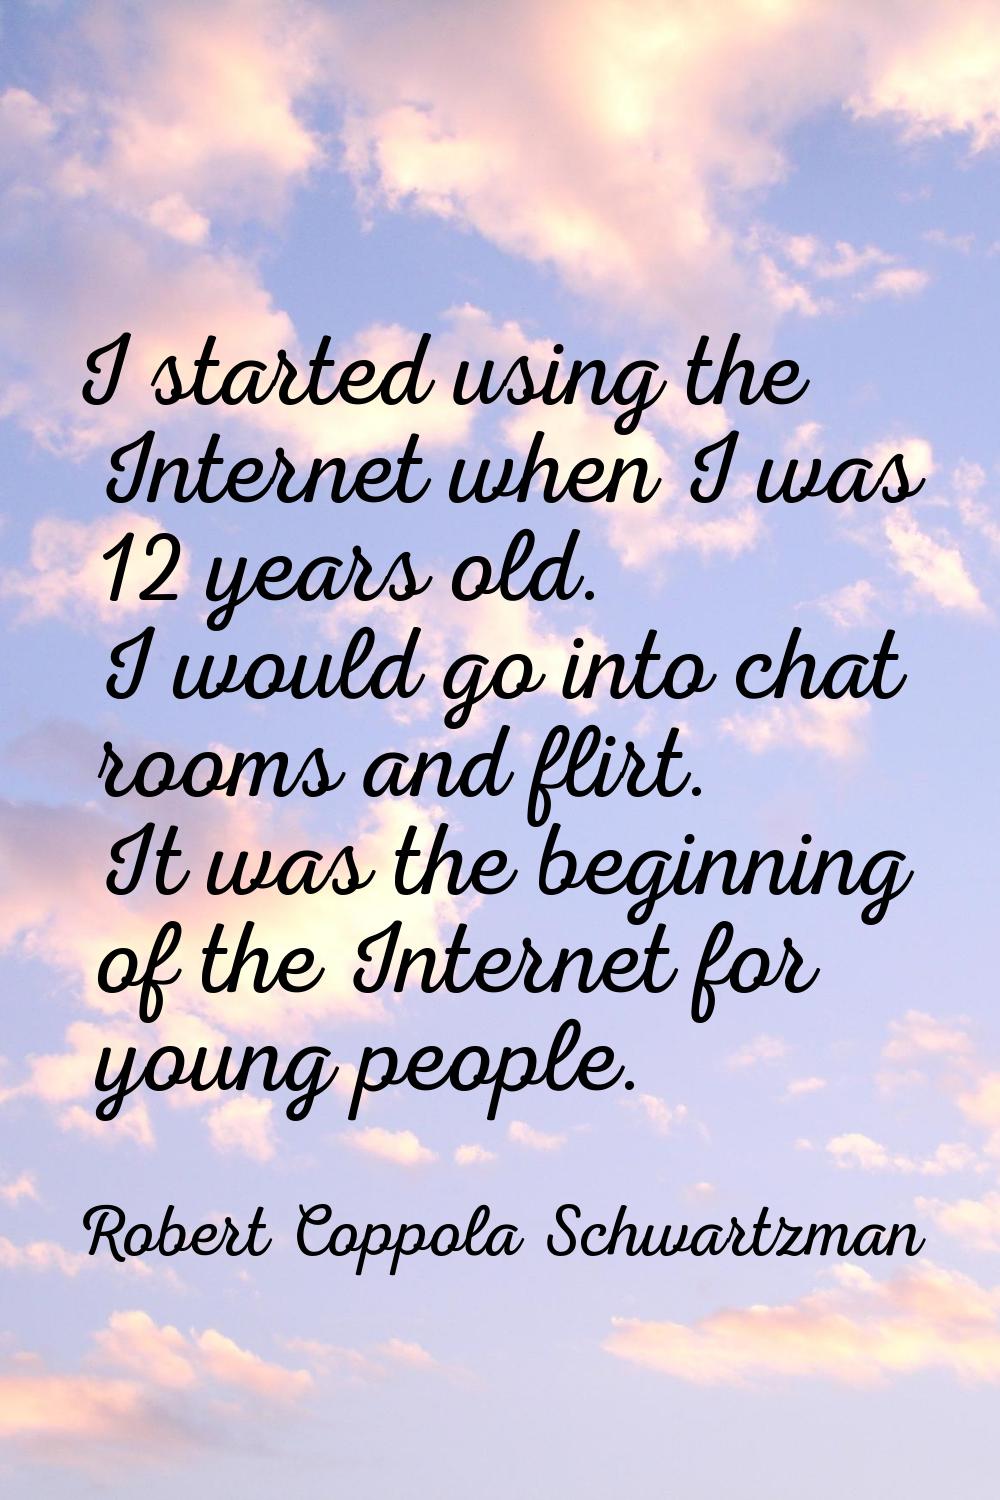 I started using the Internet when I was 12 years old. I would go into chat rooms and flirt. It was 